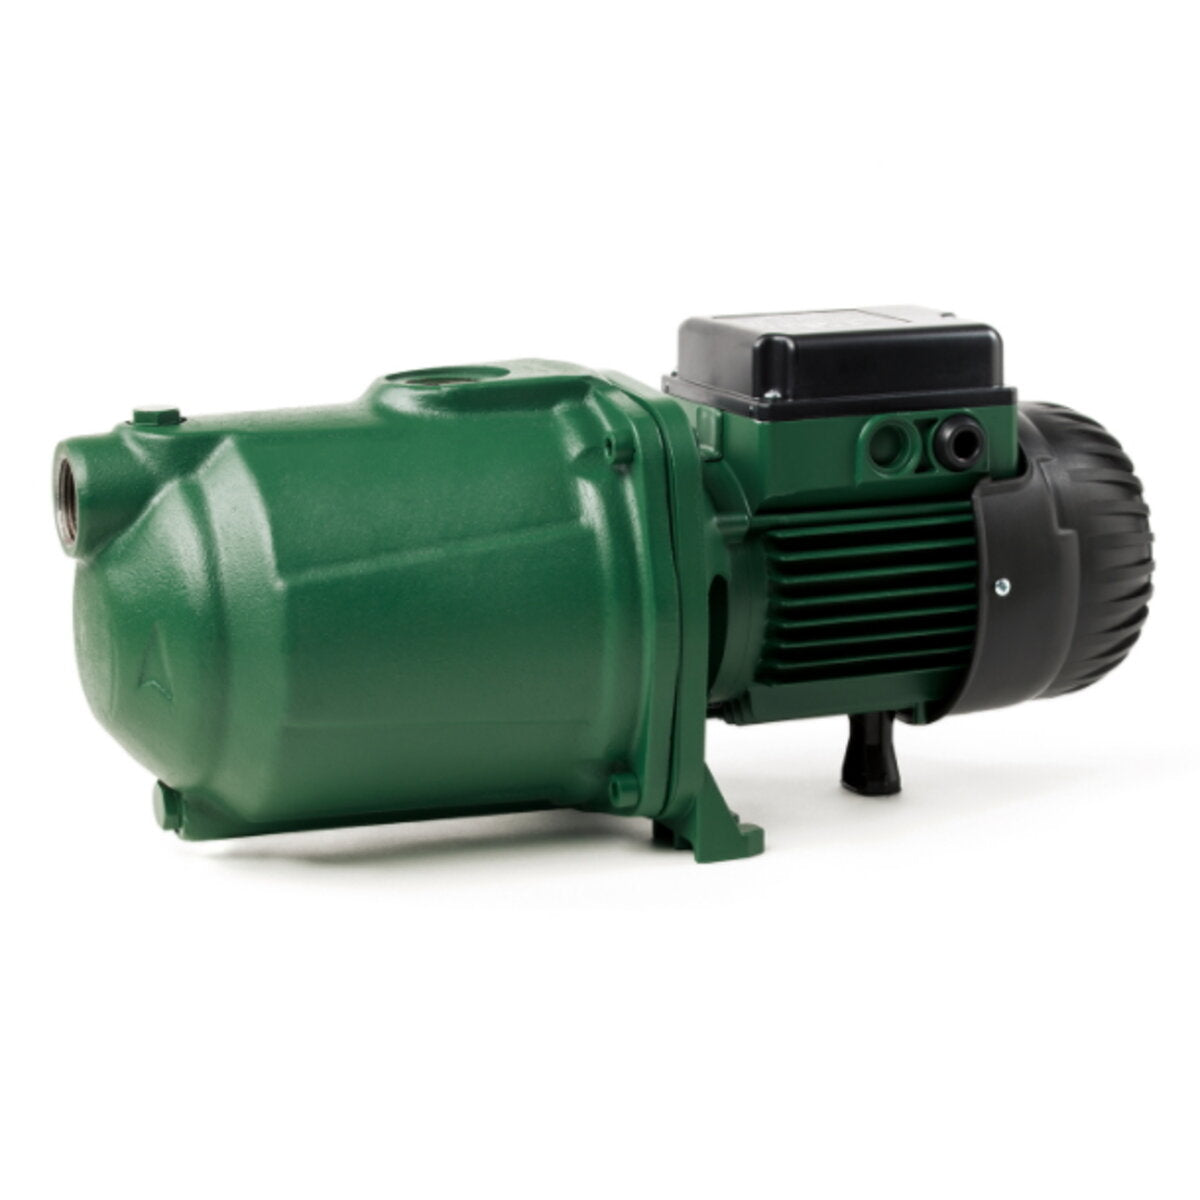 DAB EURO 25/30 M IE2 single-phase multistage centrifugal electric pump